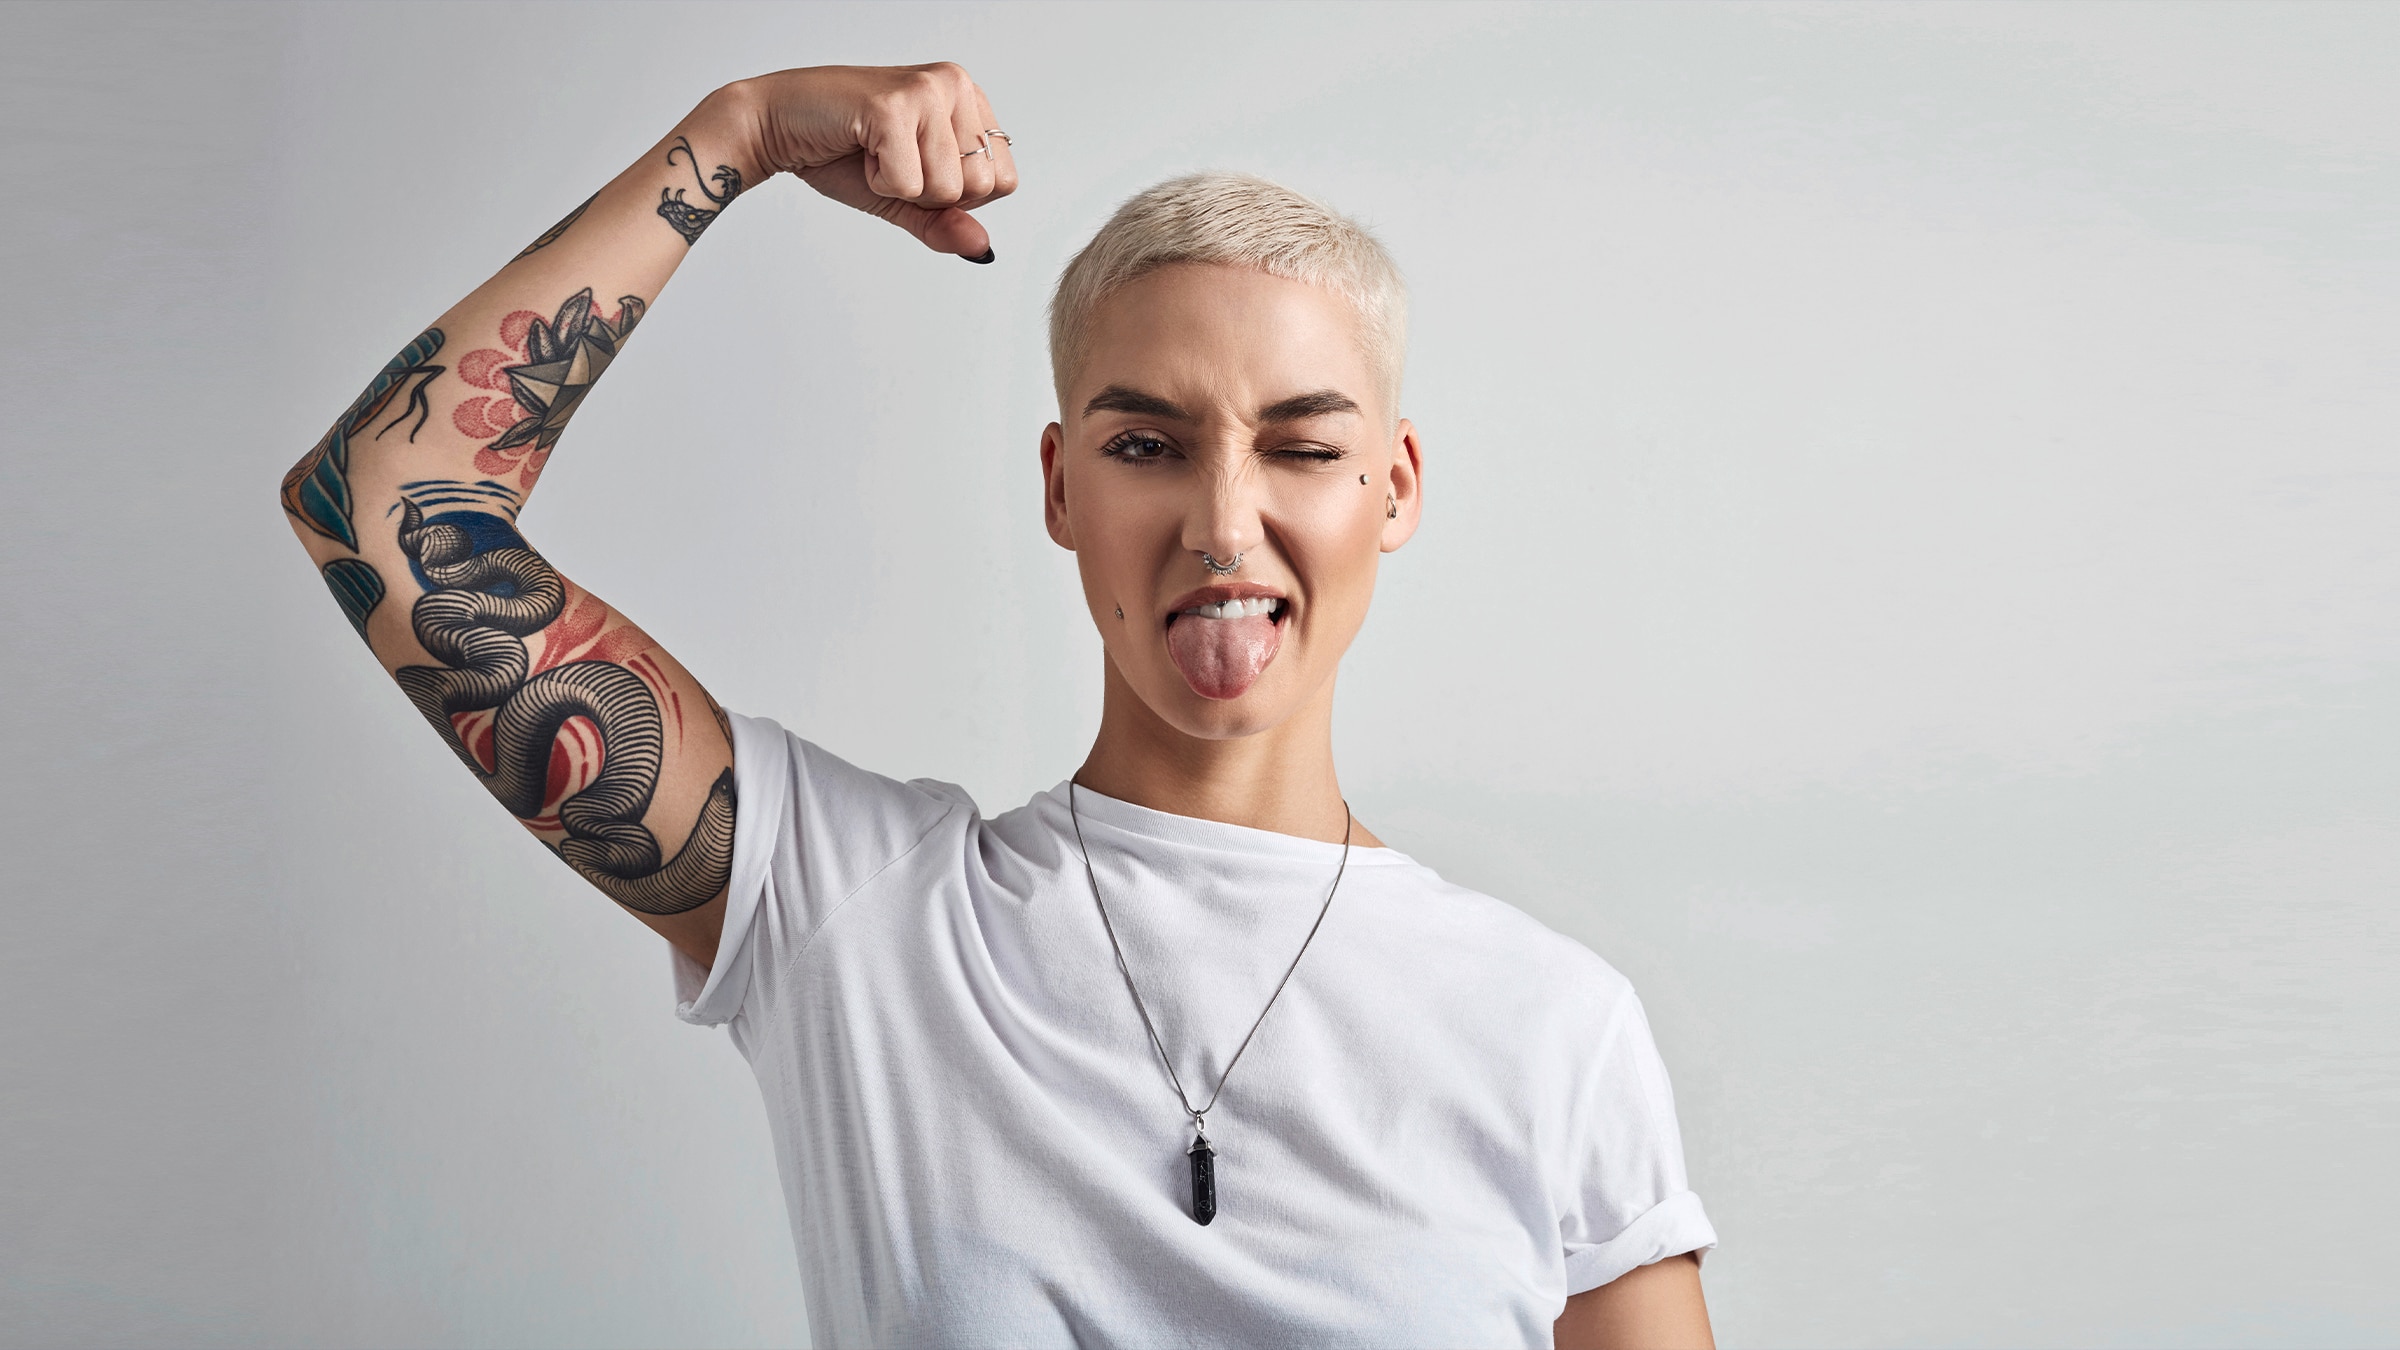 A person is shown flexing their arm. Tattoos are on the arm as the person is sticking their tongue out with one eye winced as well.